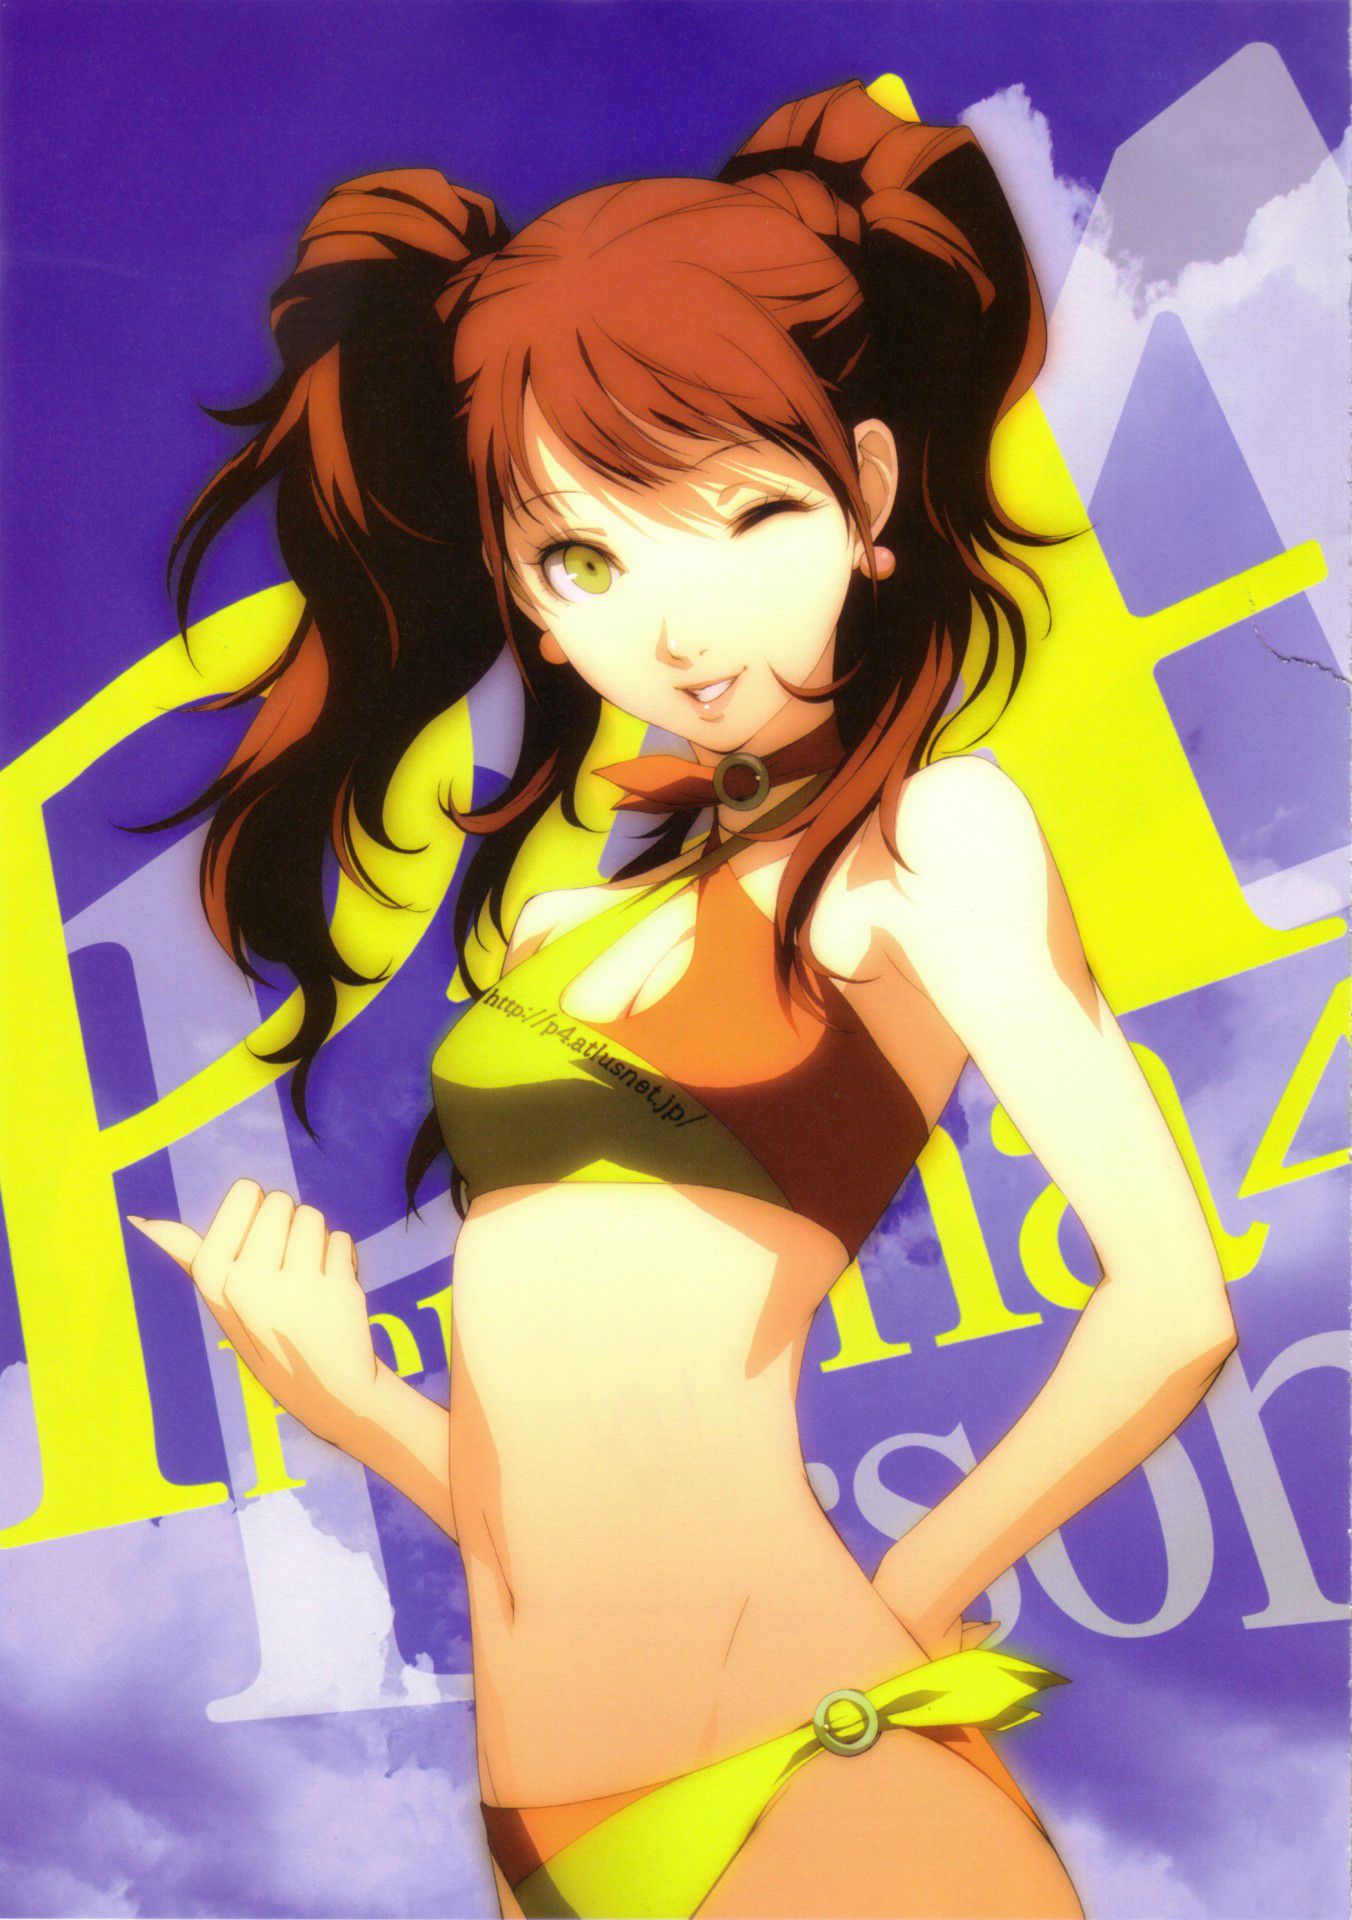 Arcana of persona series "love" your character's erotic charge, wwwwwwwwww 1